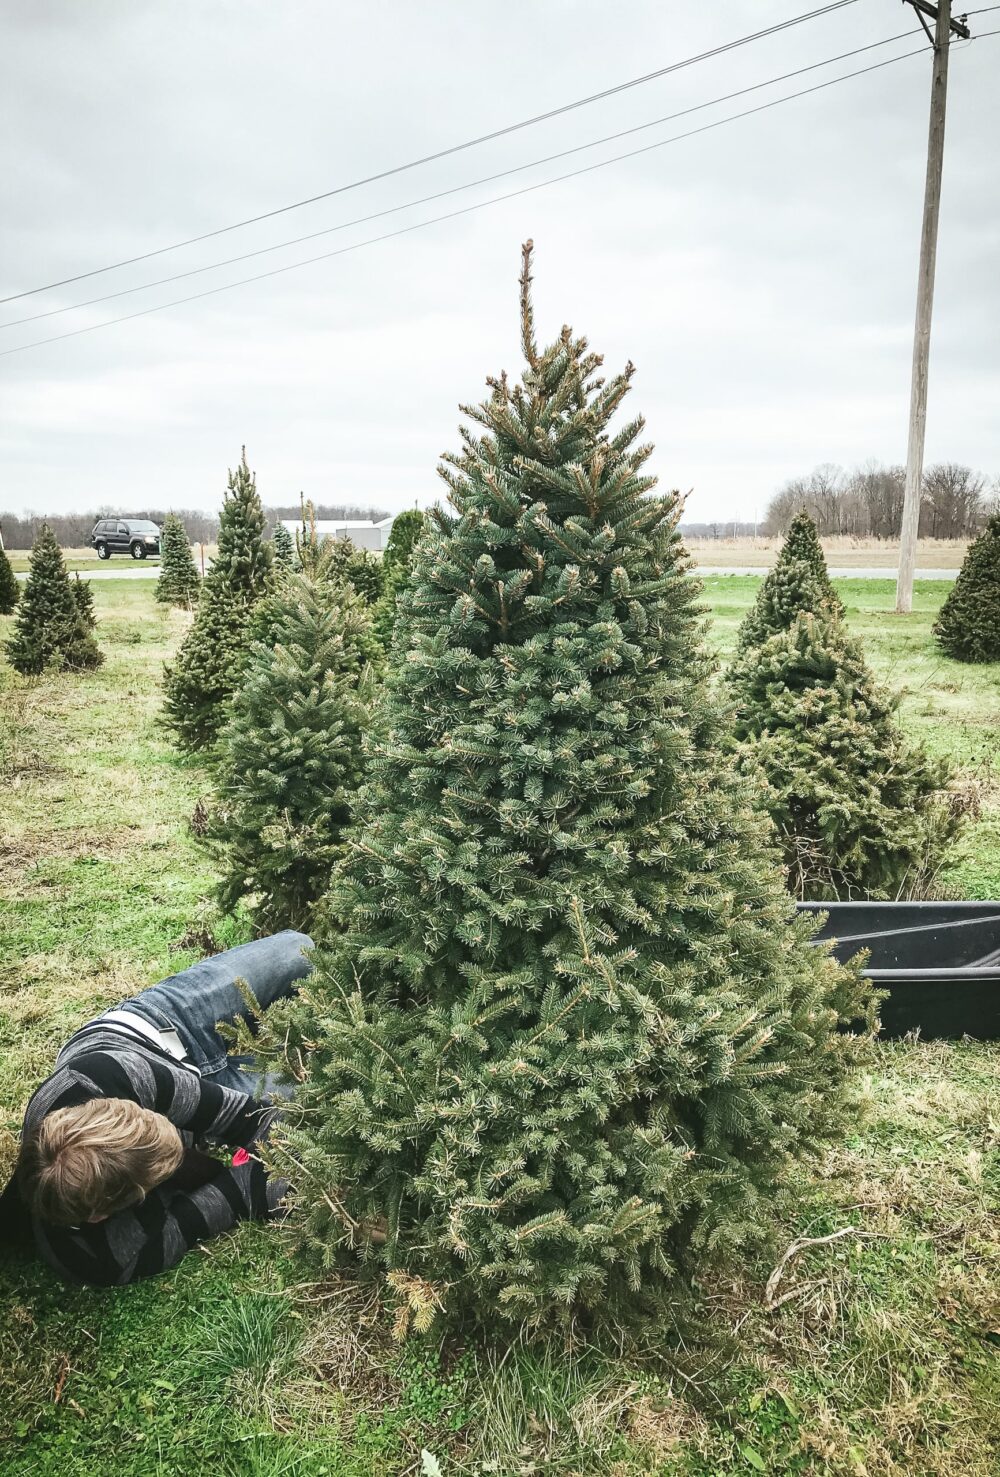 A man lying on his side cutting down a Christmas tree, more trees in the background